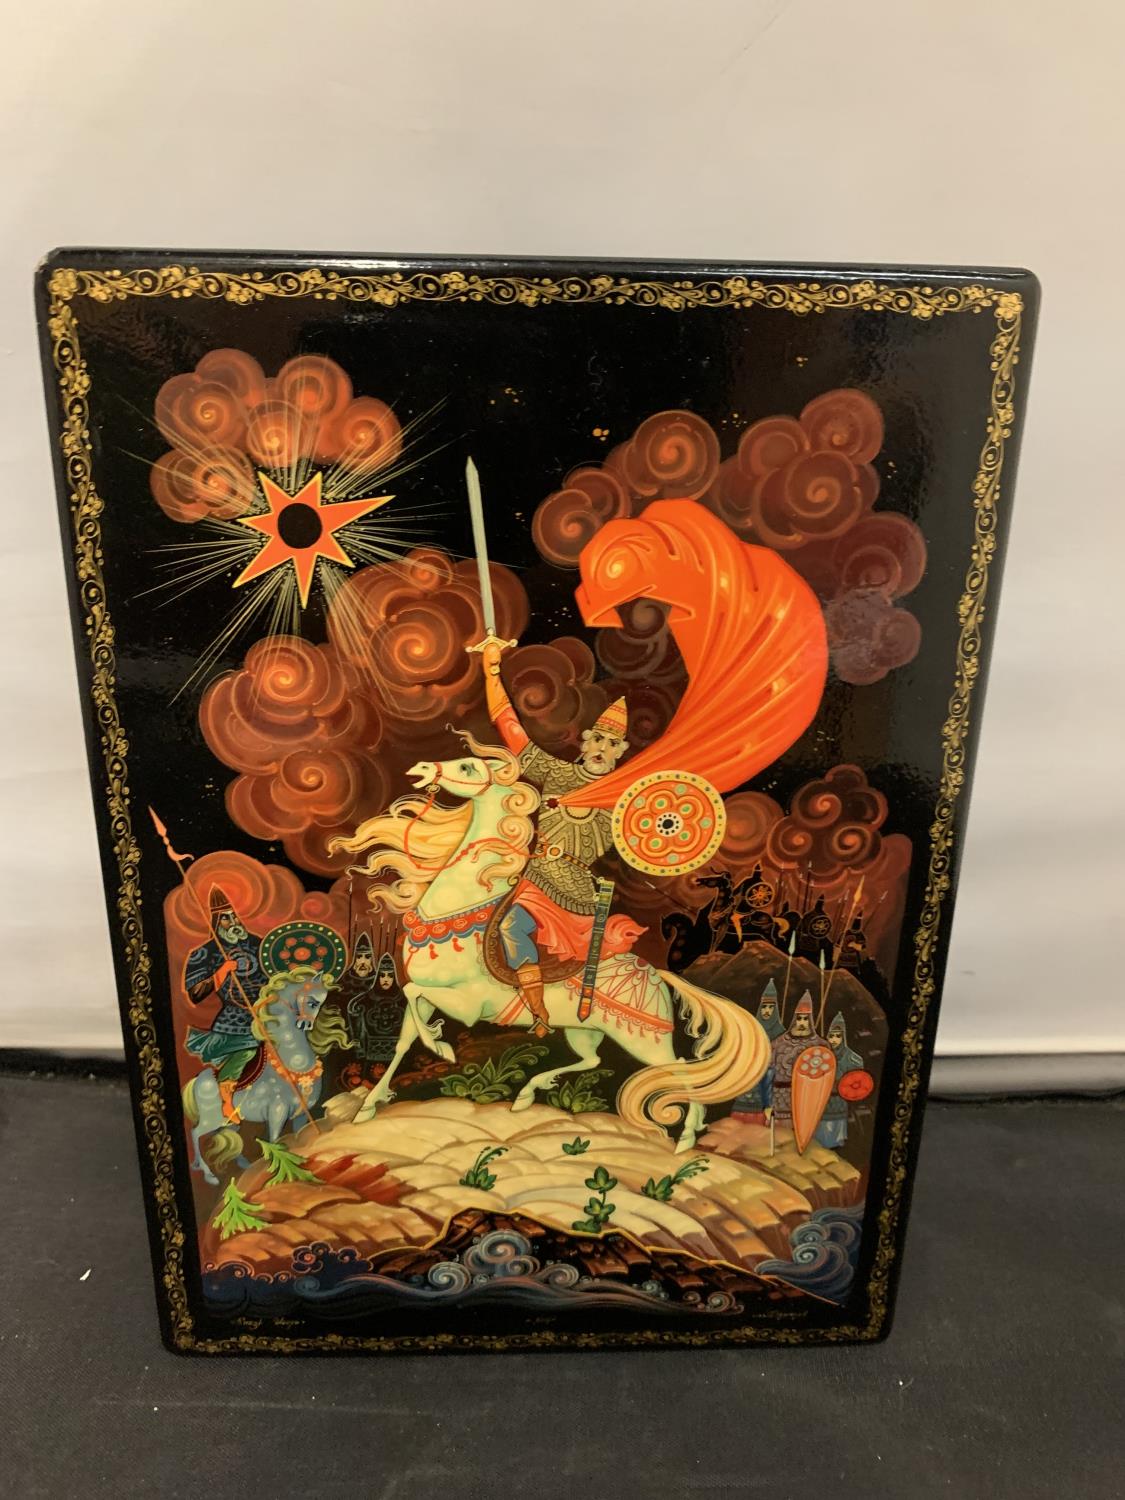 A RUSSIAN HANDPAINTED LACQUER BOX 'PRINCE IVOR' SIGNED ALONG THE BOTTOM EDGE 1980'S 15CM X 21CM